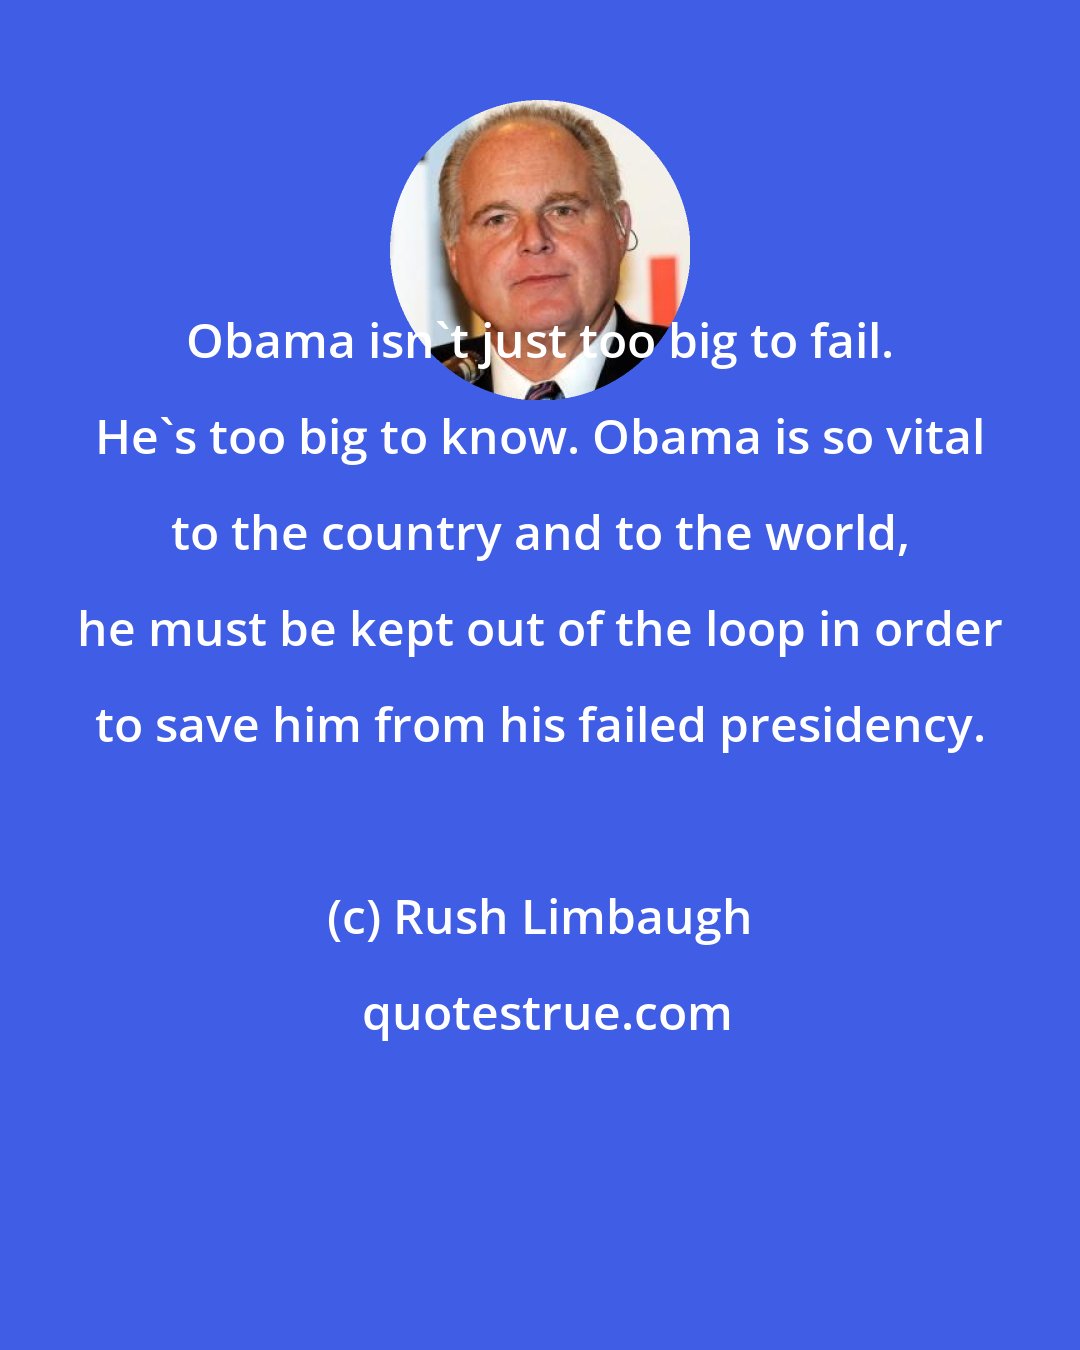 Rush Limbaugh: Obama isn't just too big to fail. He's too big to know. Obama is so vital to the country and to the world, he must be kept out of the loop in order to save him from his failed presidency.